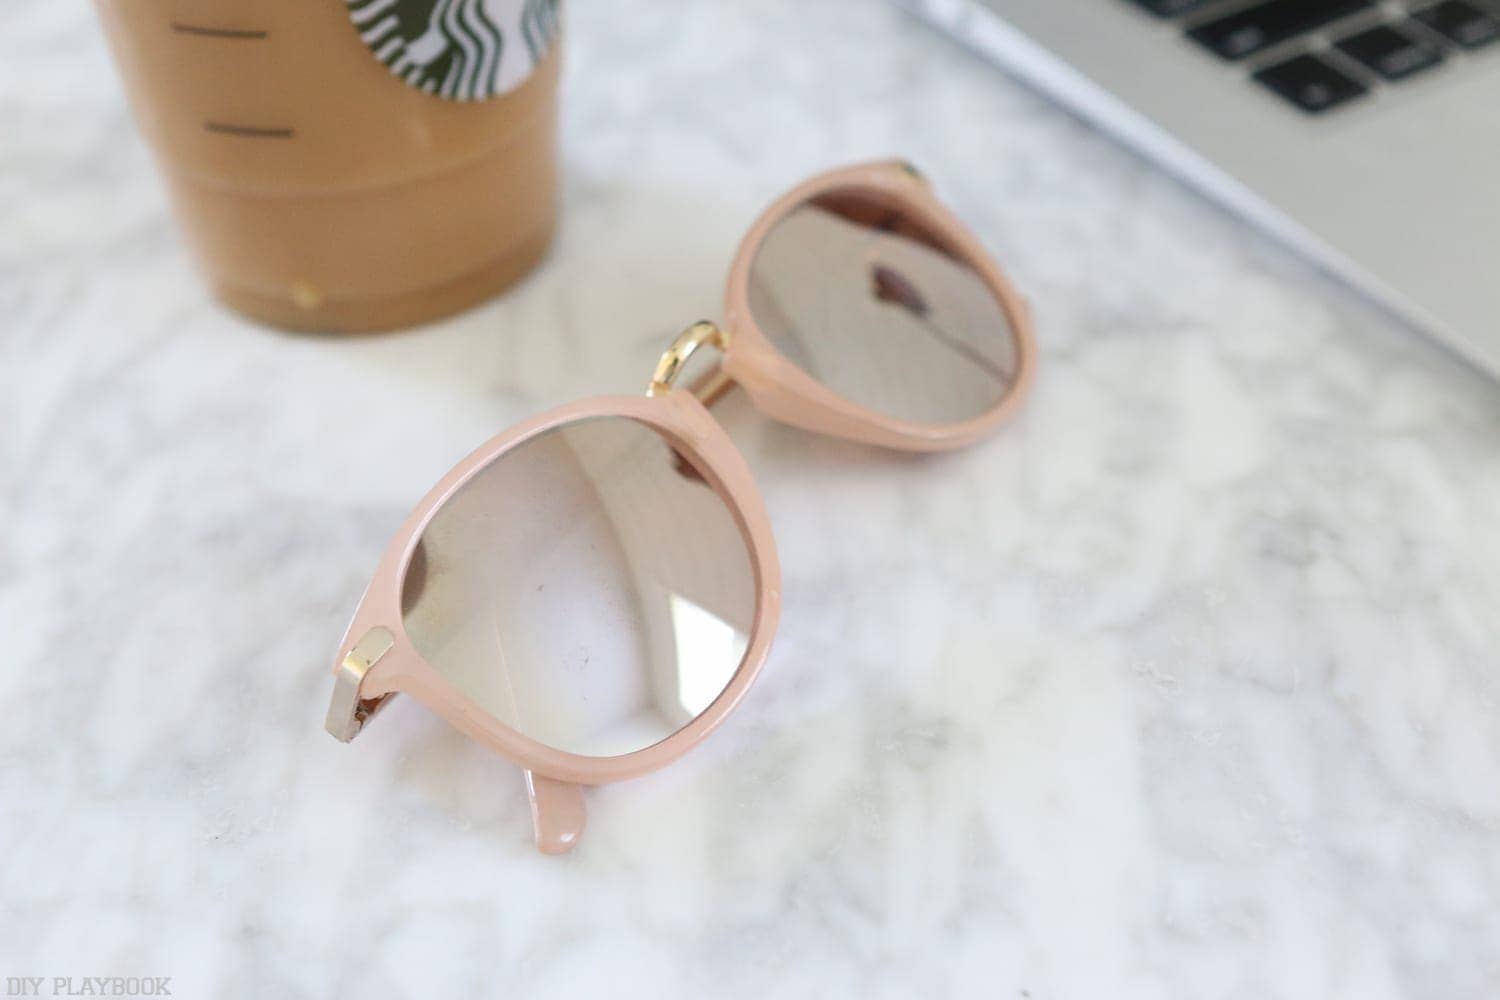 The perfect pair of sunglasses for summer - affordable and stylish!